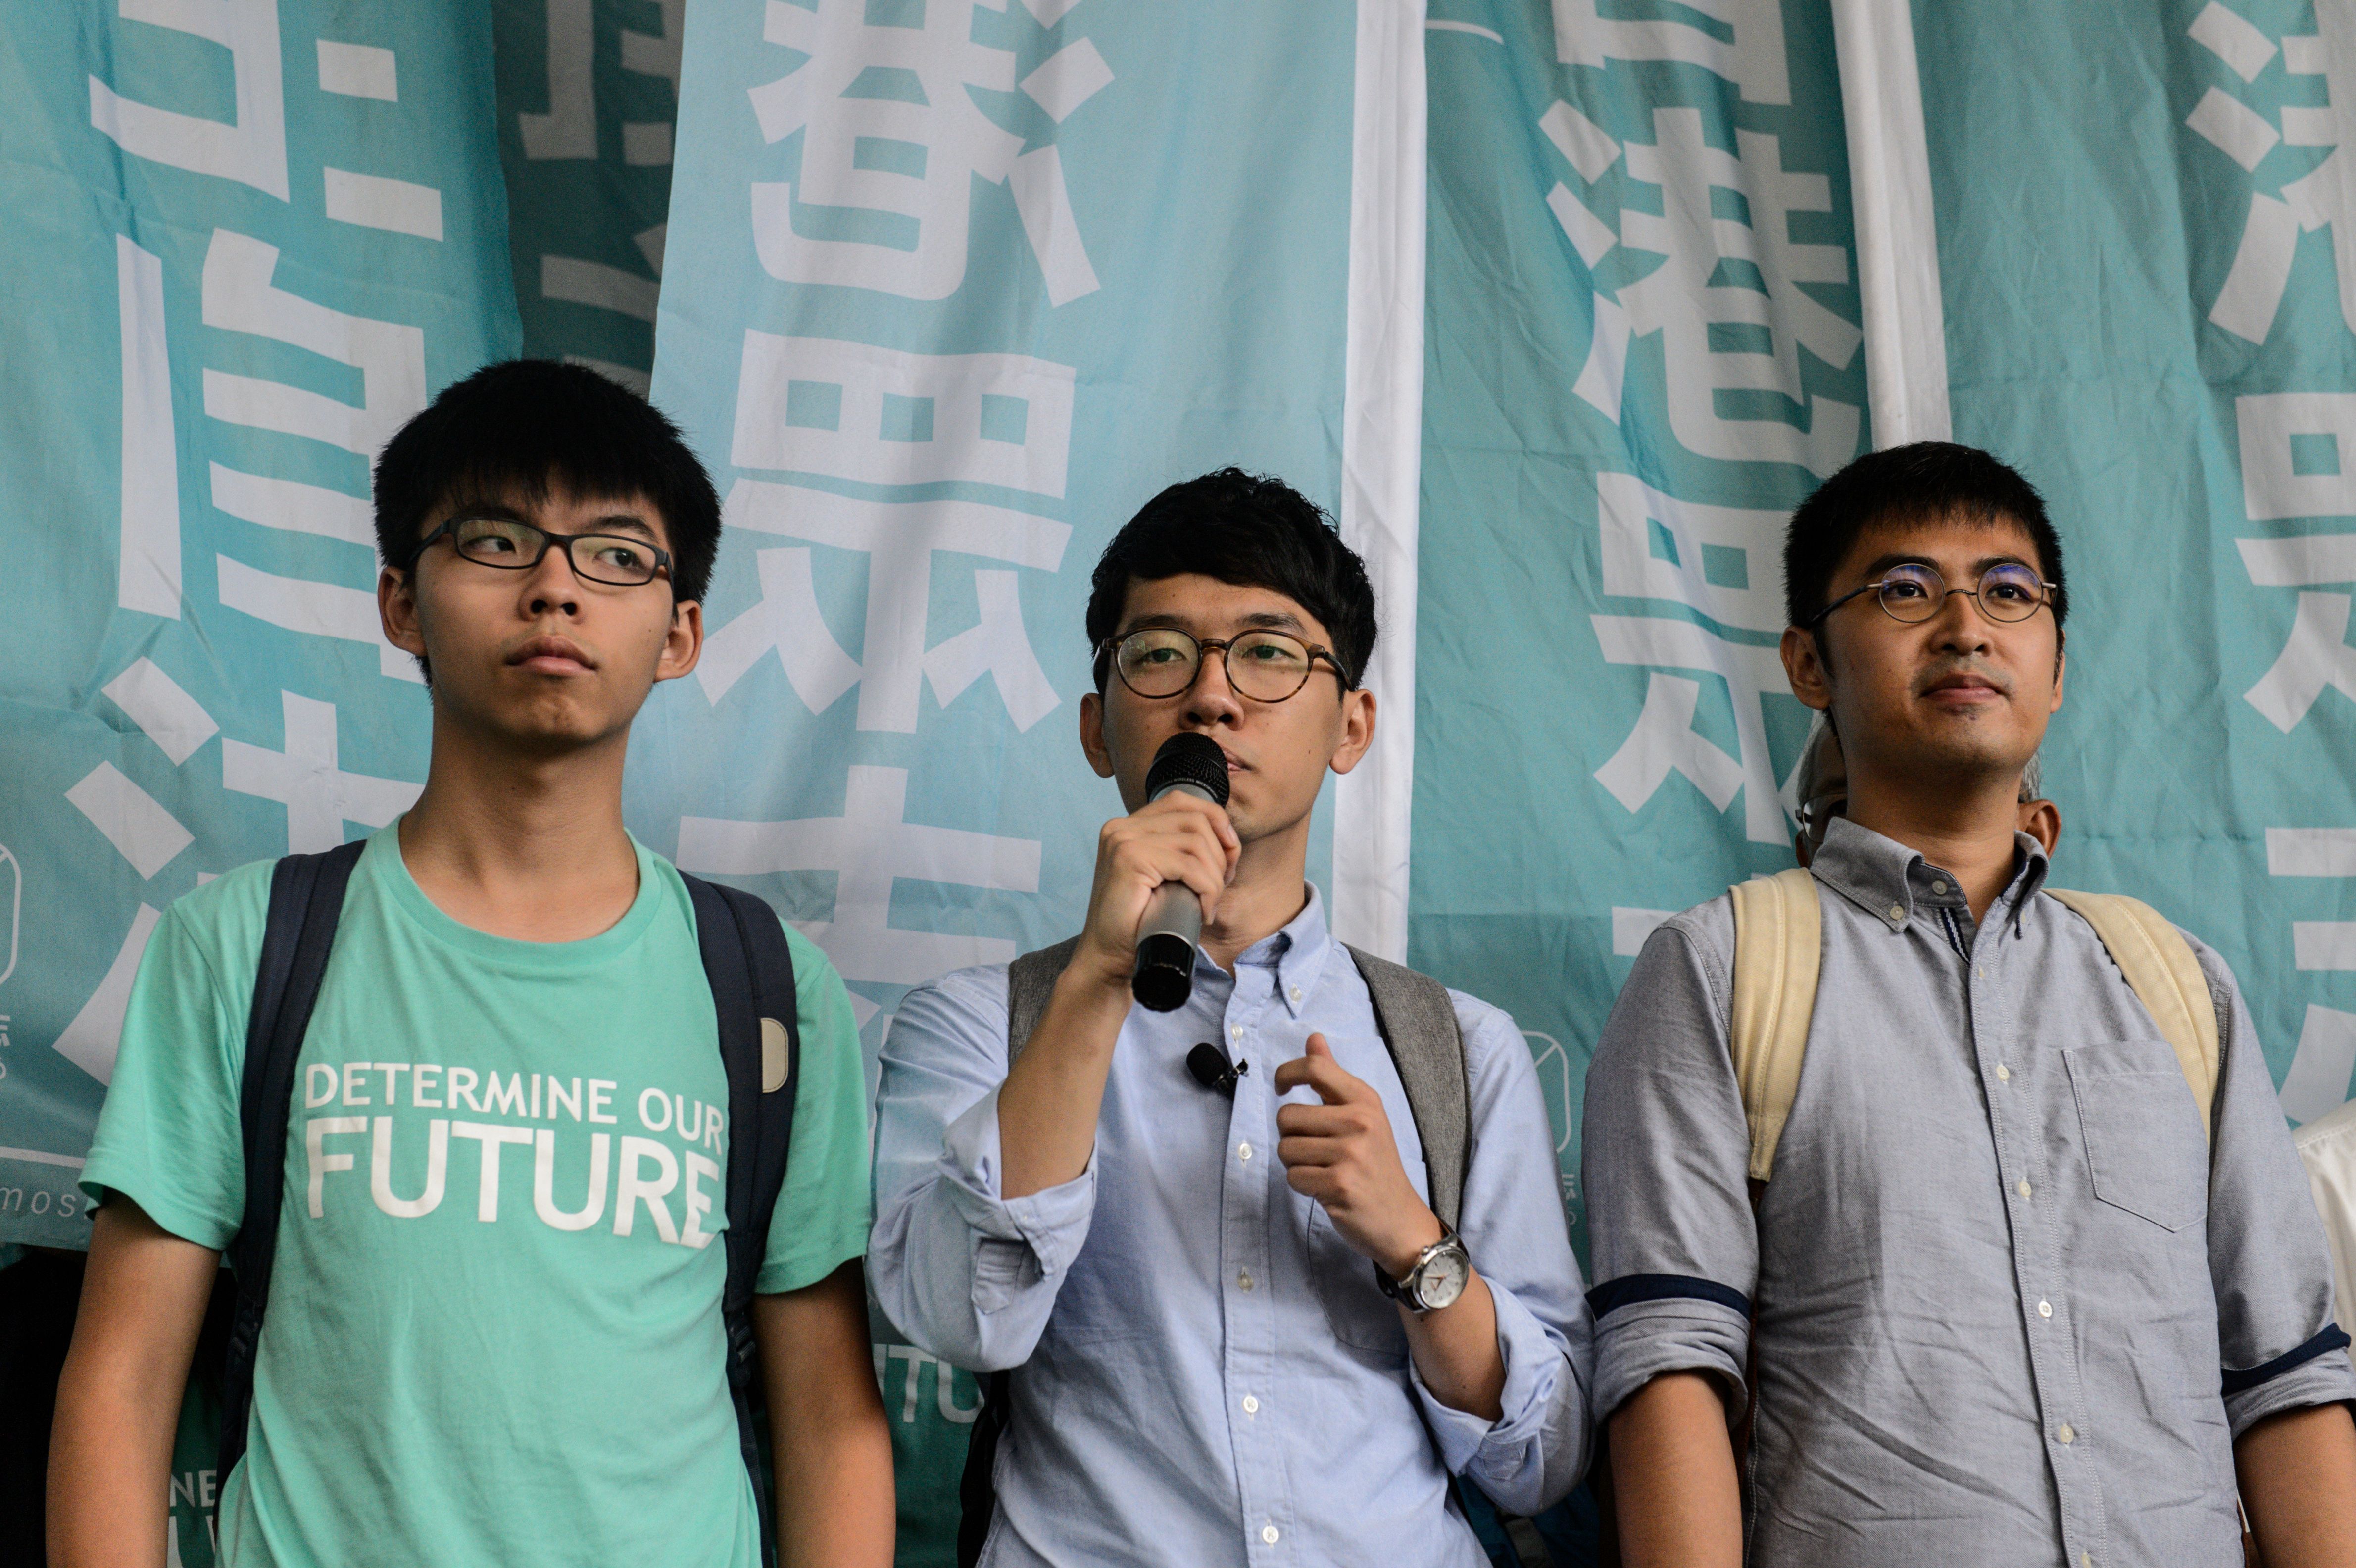 Leaders of Hong Kong's Umbrella Revolution, left to right, Joshua Wong, 19; Nathan Law, 23; and Alex Chow, 25, speak to the press following their sentencing at the Eastern Court in Hong Kong on Aug. 15, 2016 (Anthony Wallace—AFP/Getty Images)